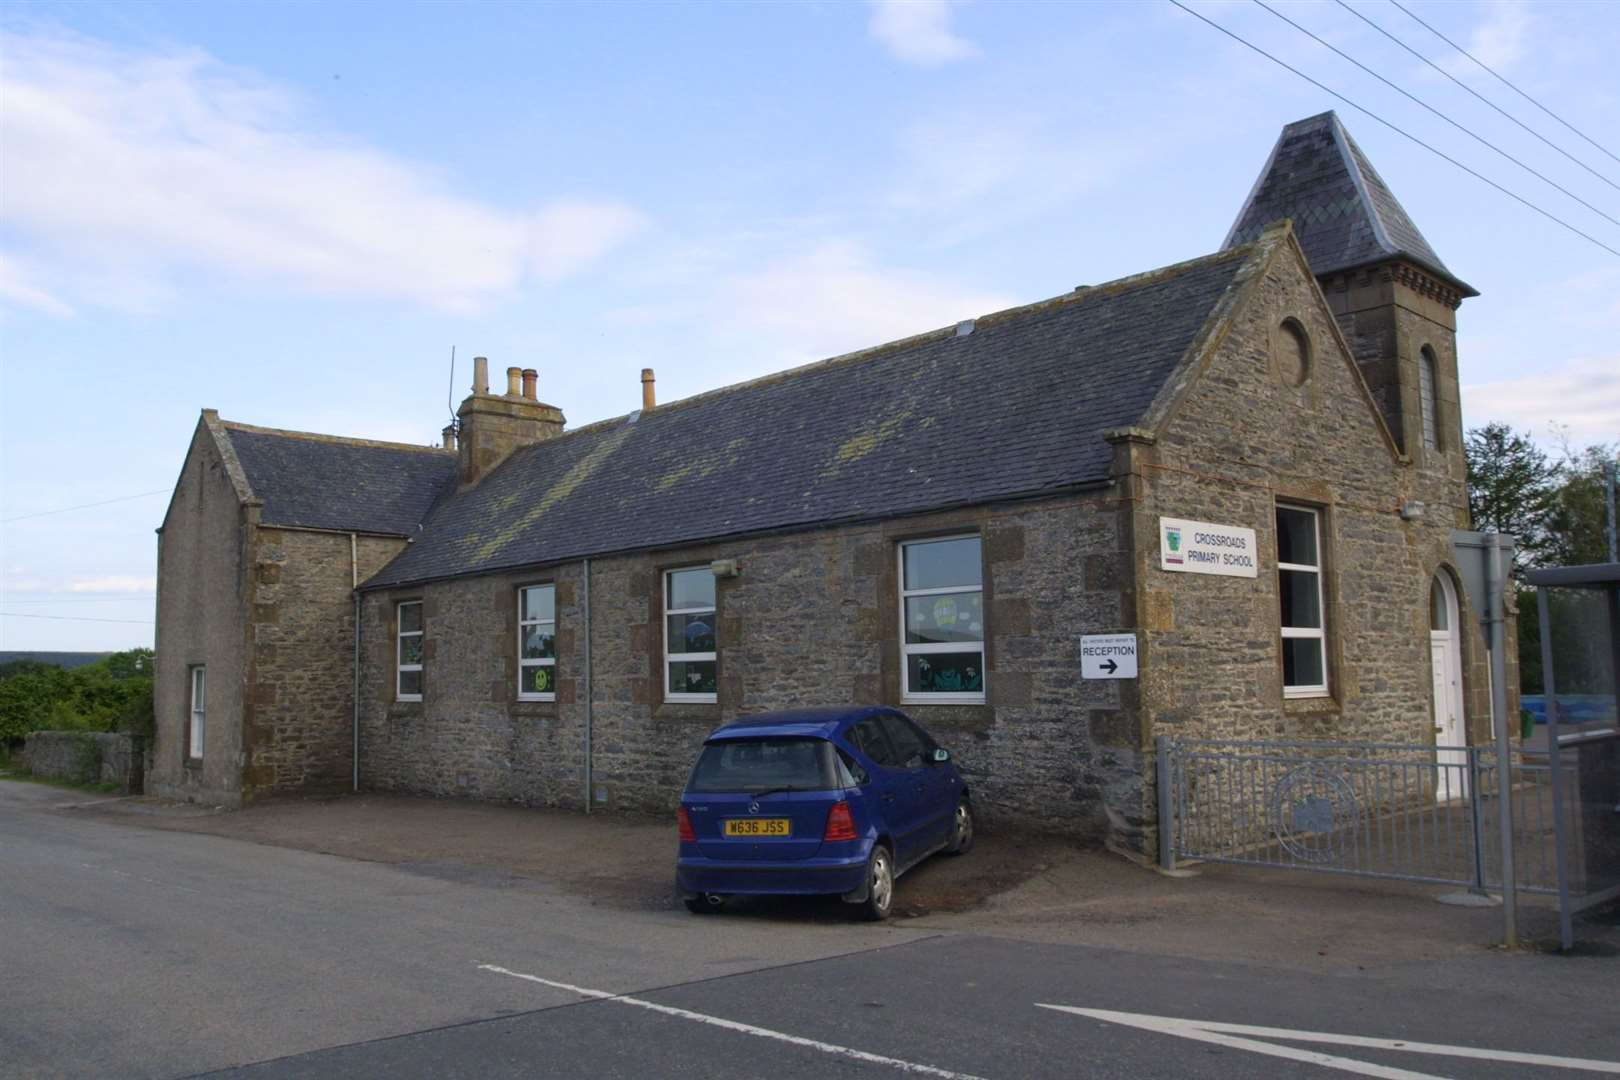 Crossroads Primary is one of six school buildings around Keith rated as 'poor'